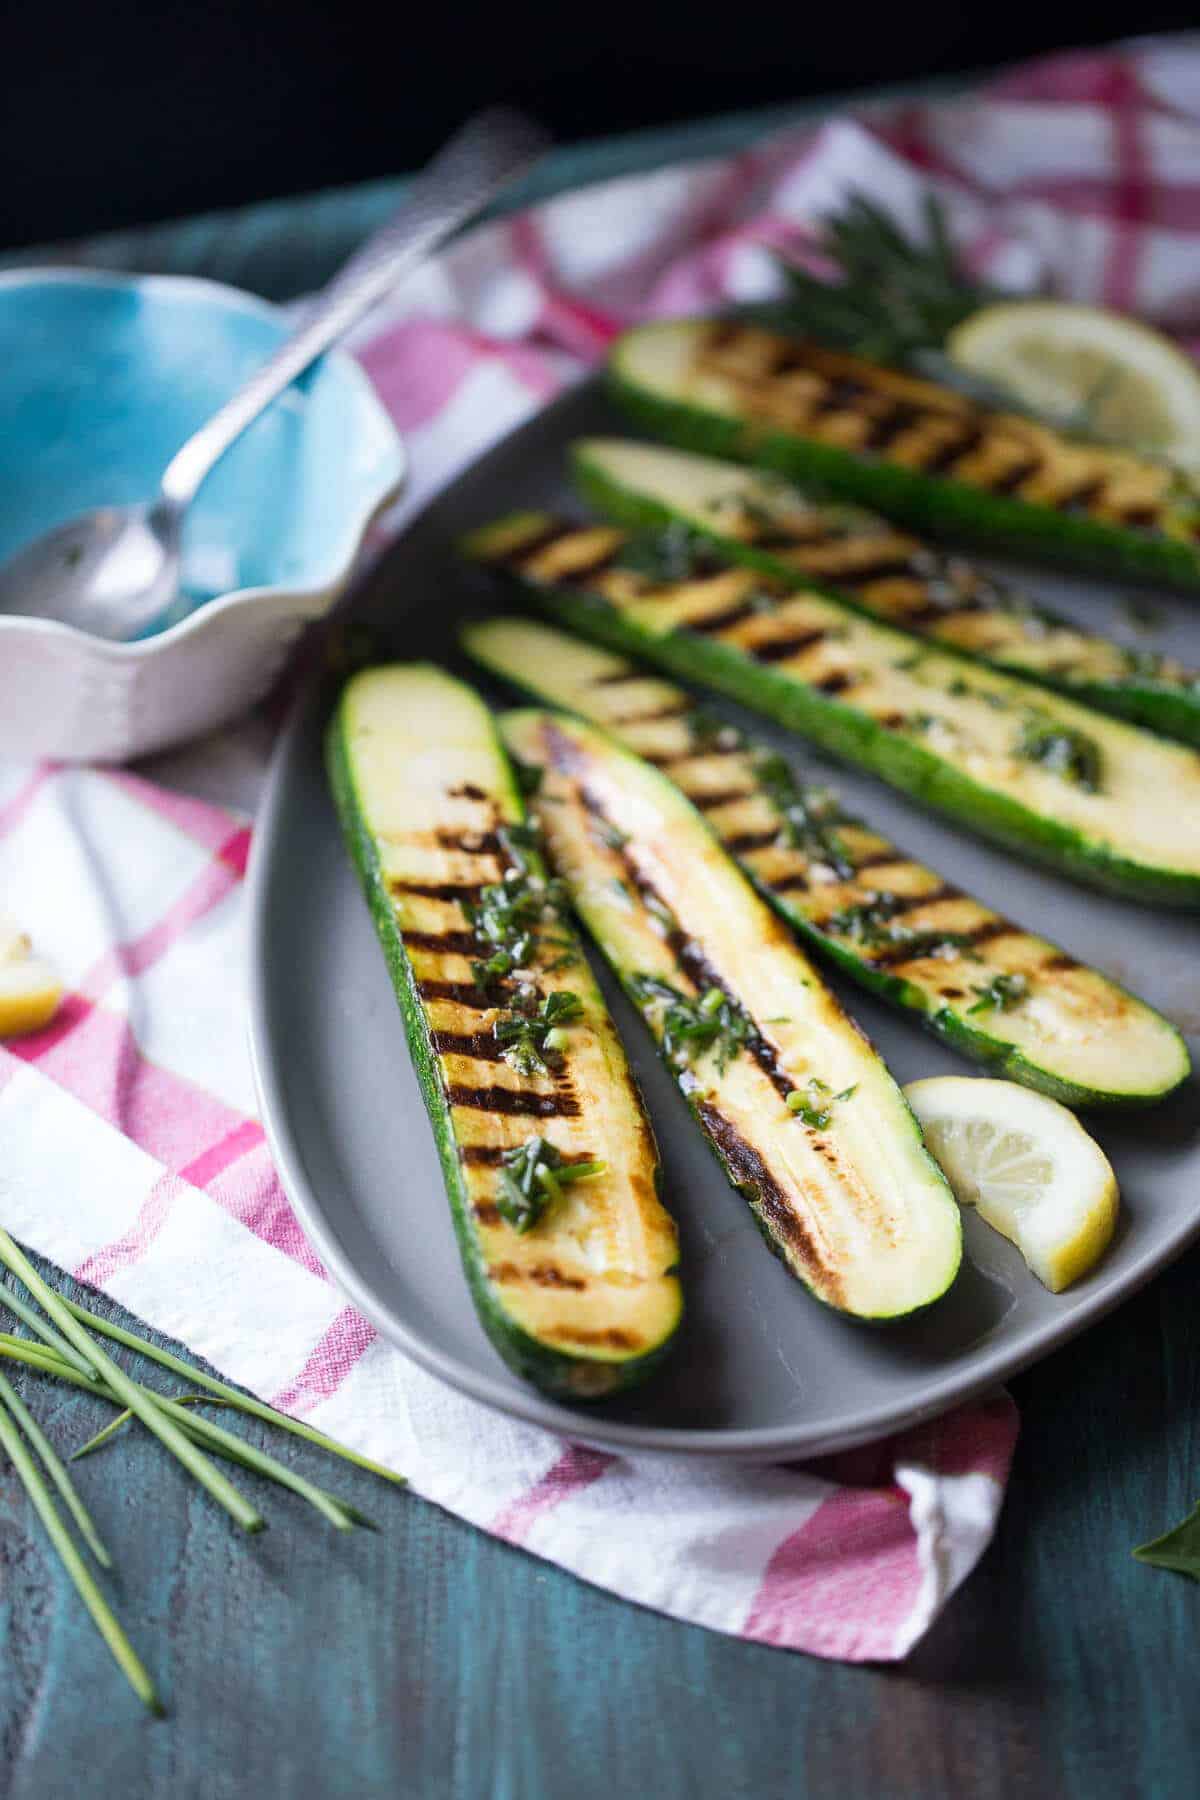 Grilled zucchini slices with herbs